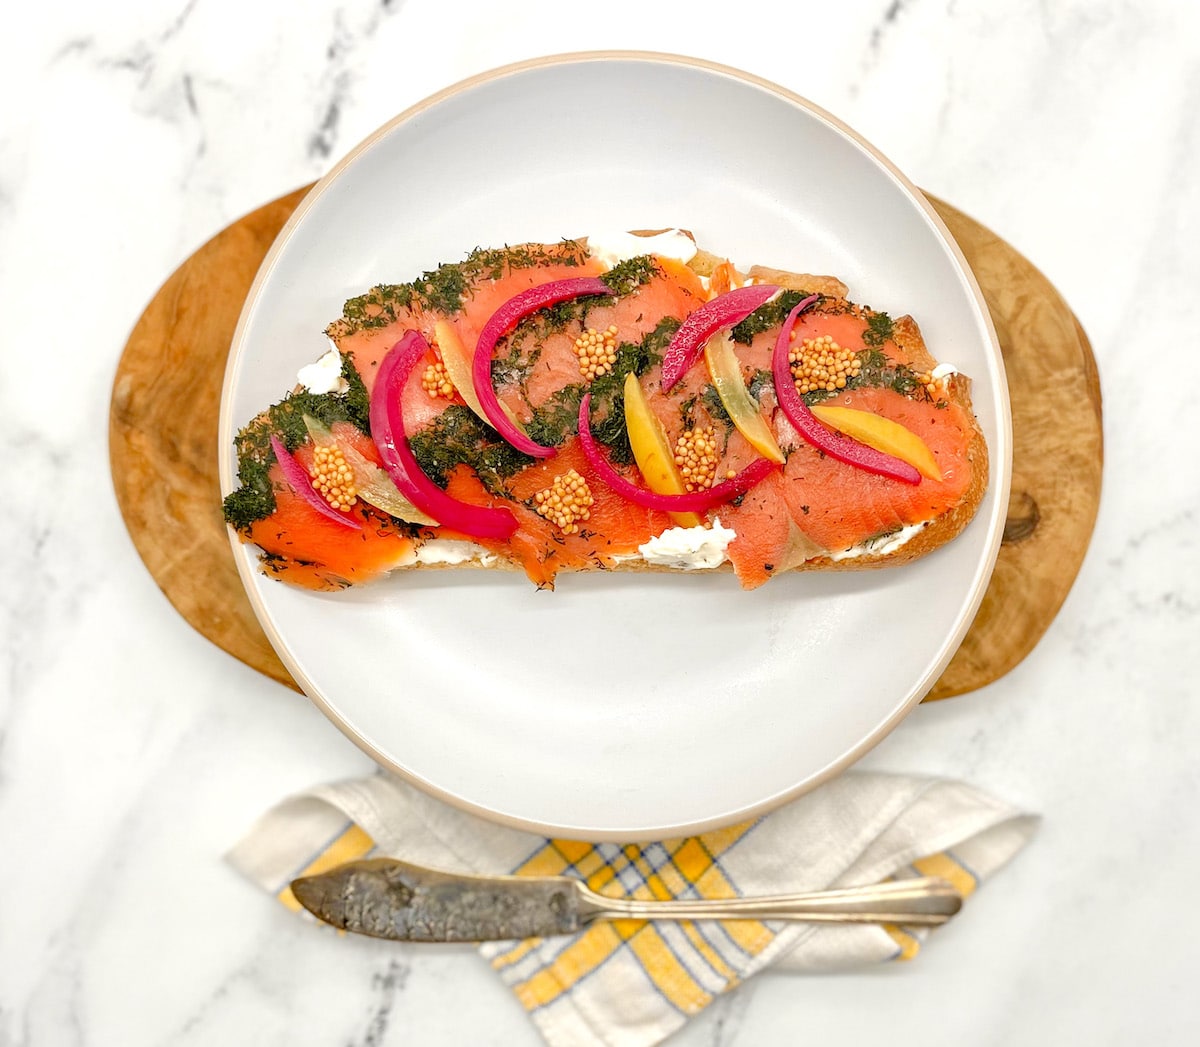 Toasted bread spread with cream cheese and topped with herb-cured salmon, pickled red onion slices, preserved lemon slices and pickled mustard seeds on a white plate with a butcher block and white marble background.